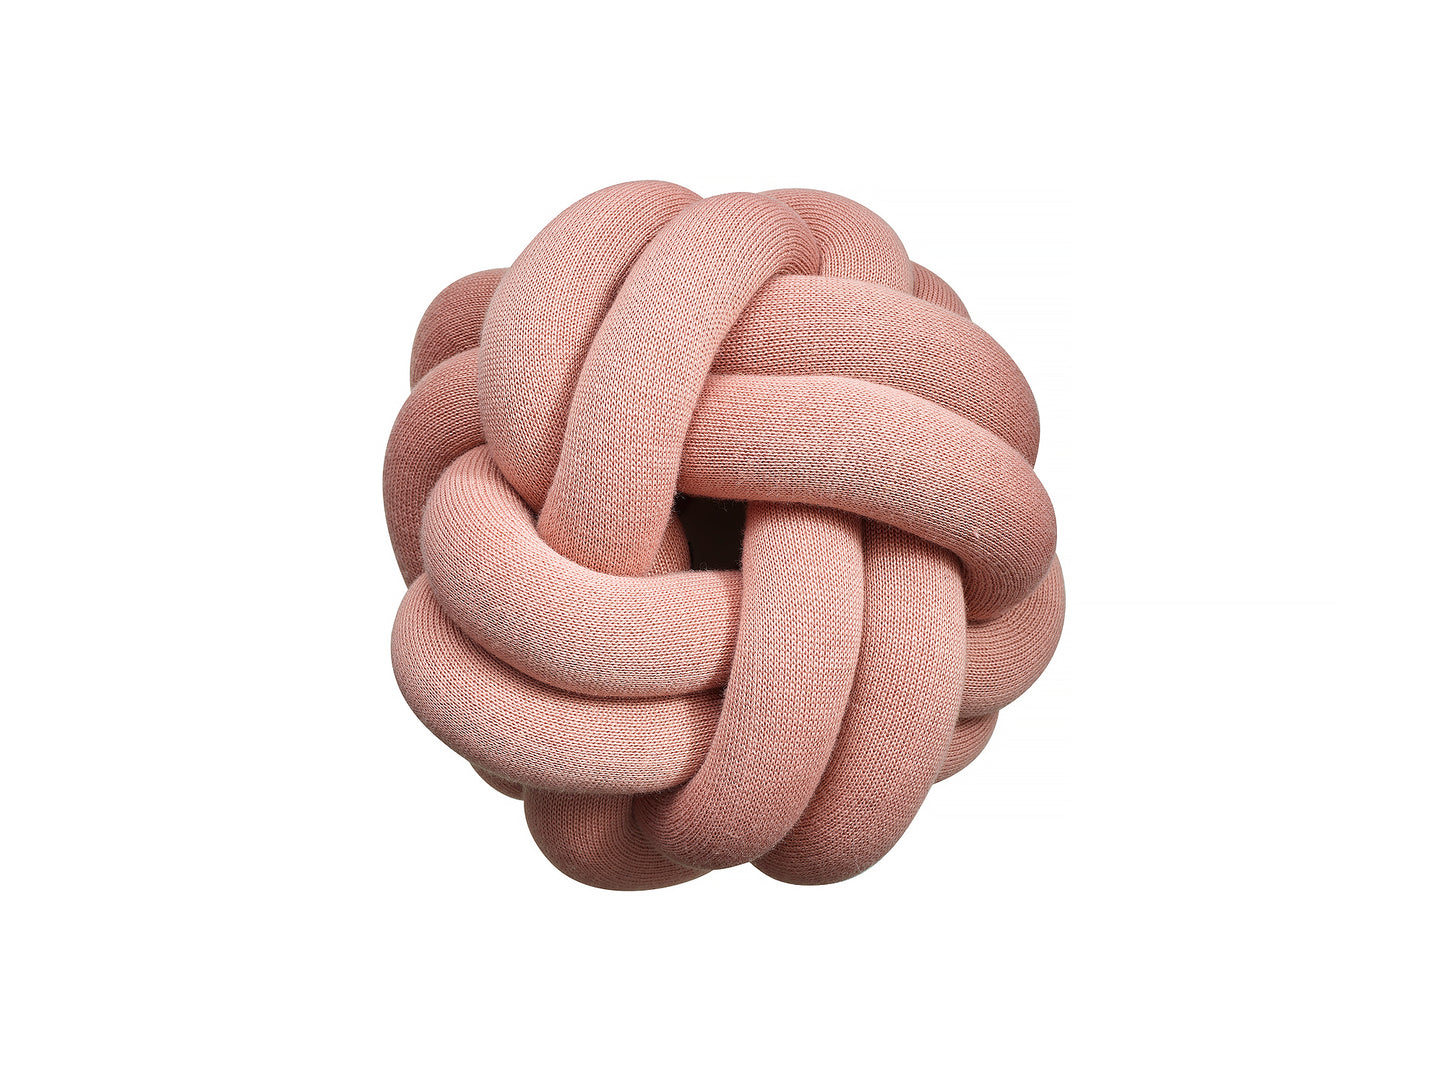 Dusty Pink Knot Cushion by Design House Stockholm